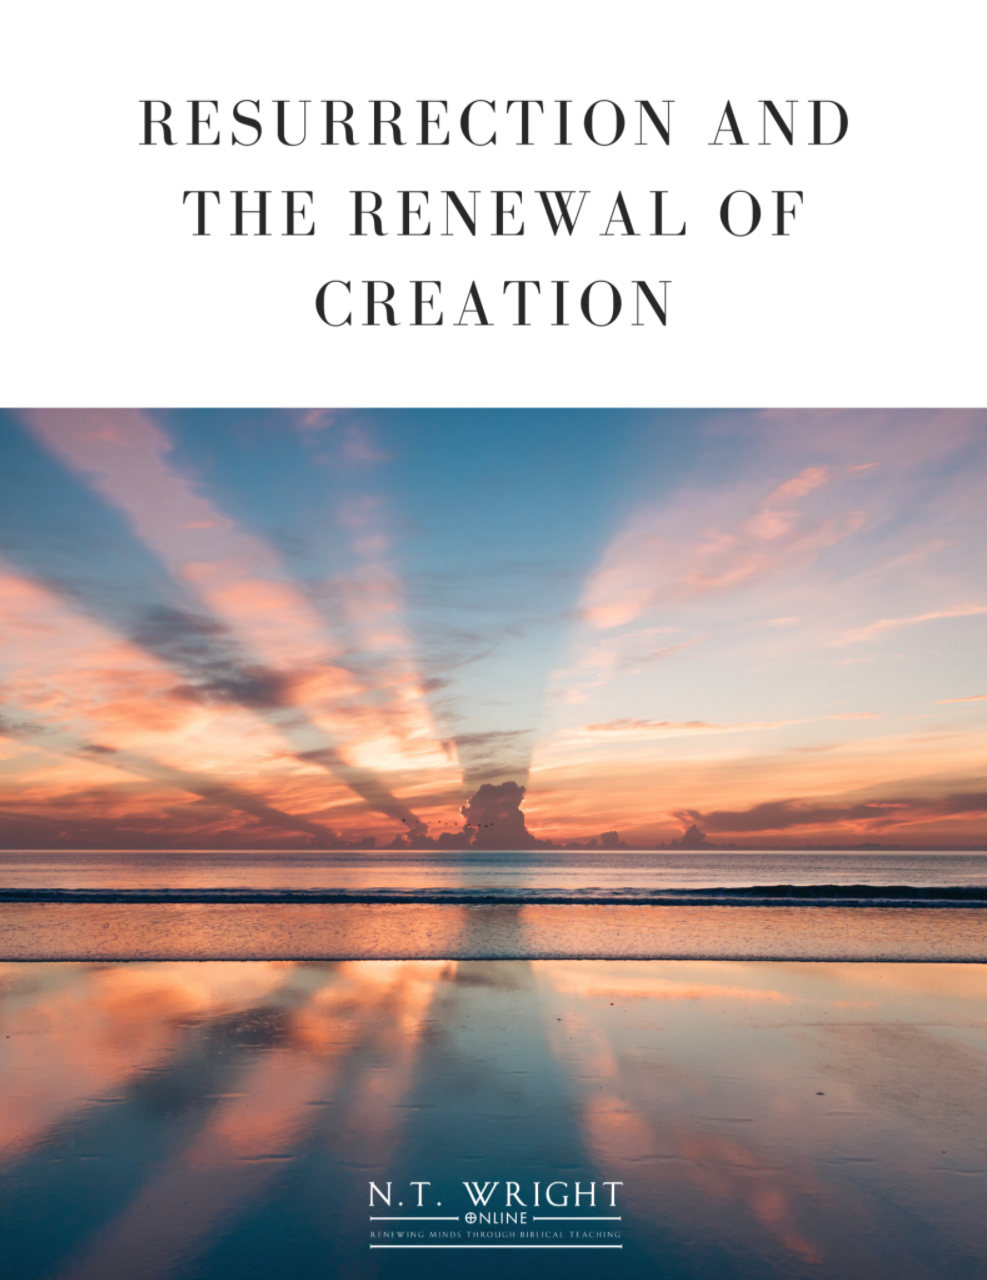 Resurrection and the Renewal of Creation